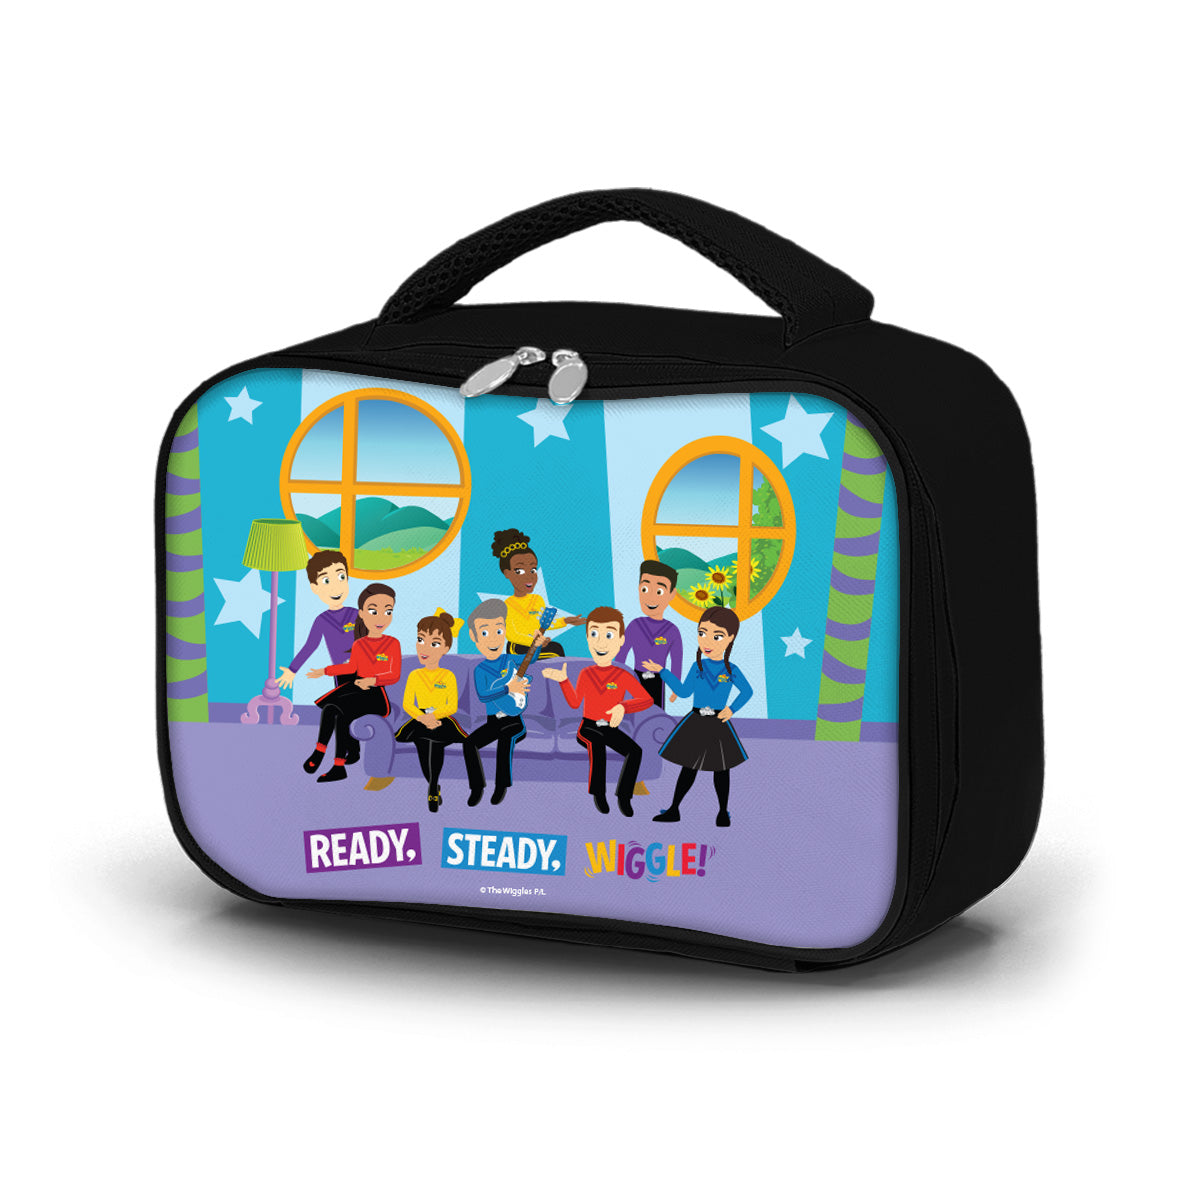 The Wiggles Lunch Cooler